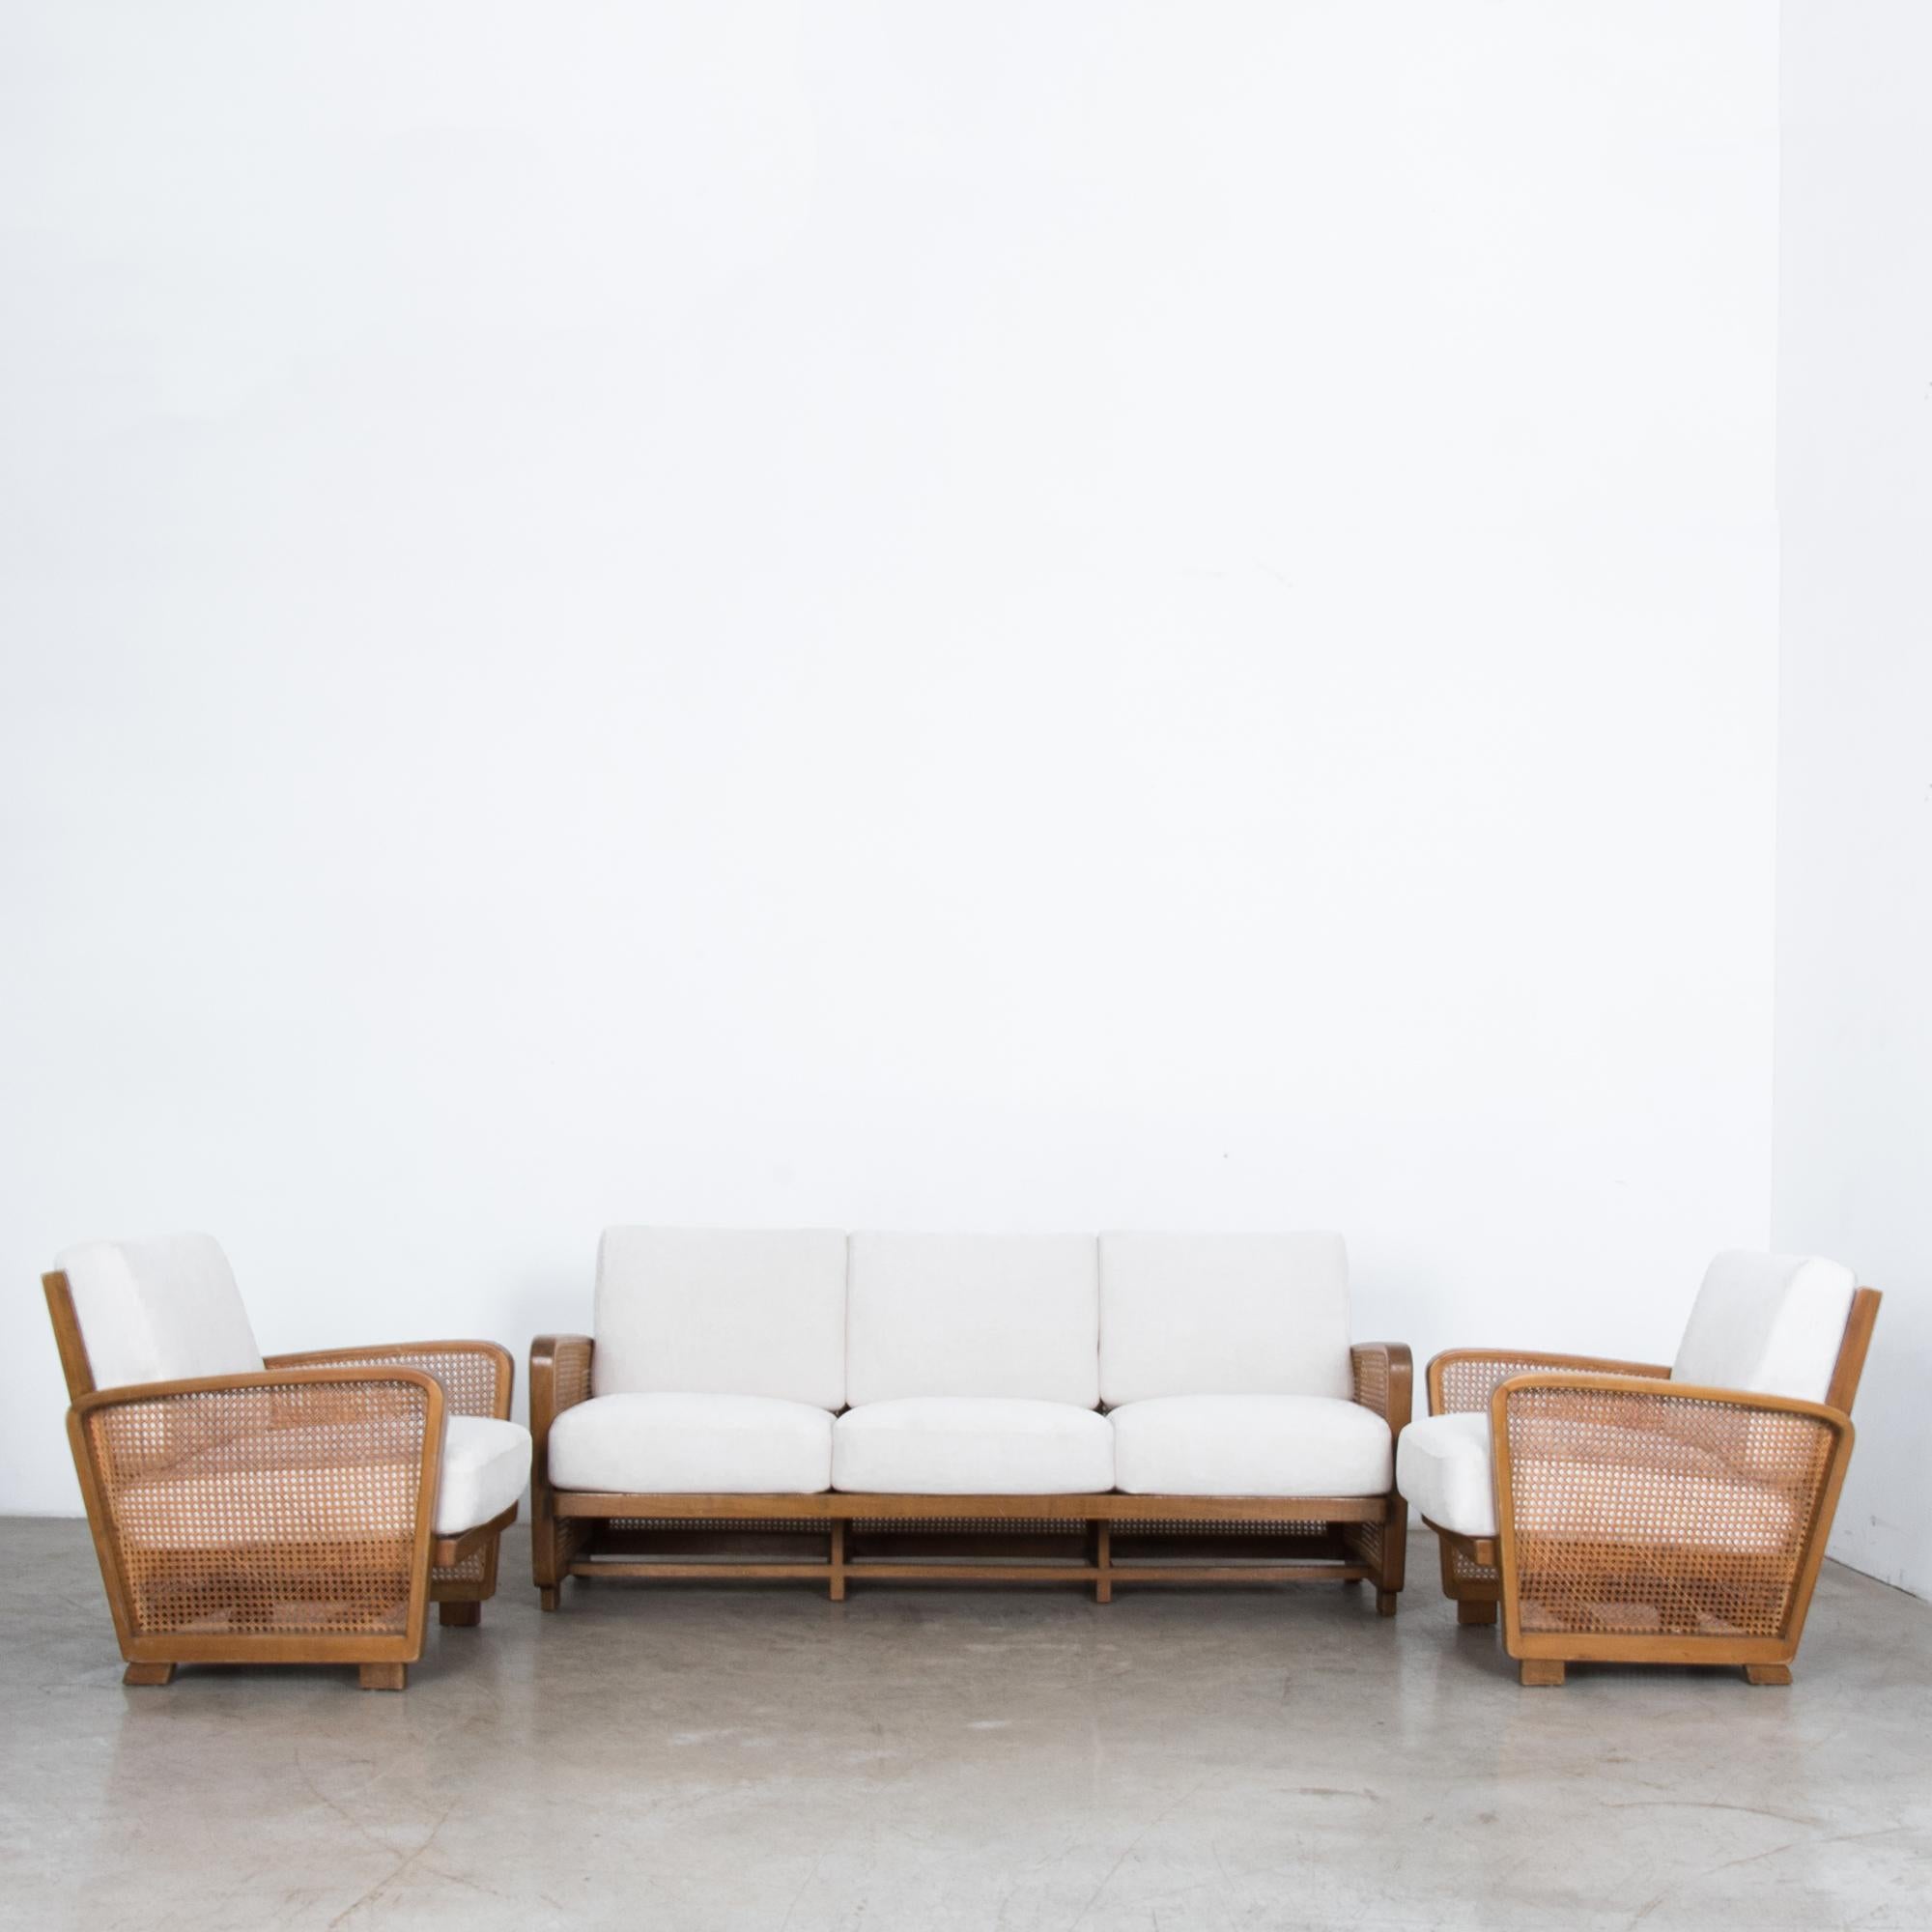 From Germany, circa 1950 this three piece sofa set includes a three seat standard sofa and two armchairs in beech wood and woven straw. A typical mid-20th century German design, simple forms from natural materials, the whiff of Bauhaus still in the